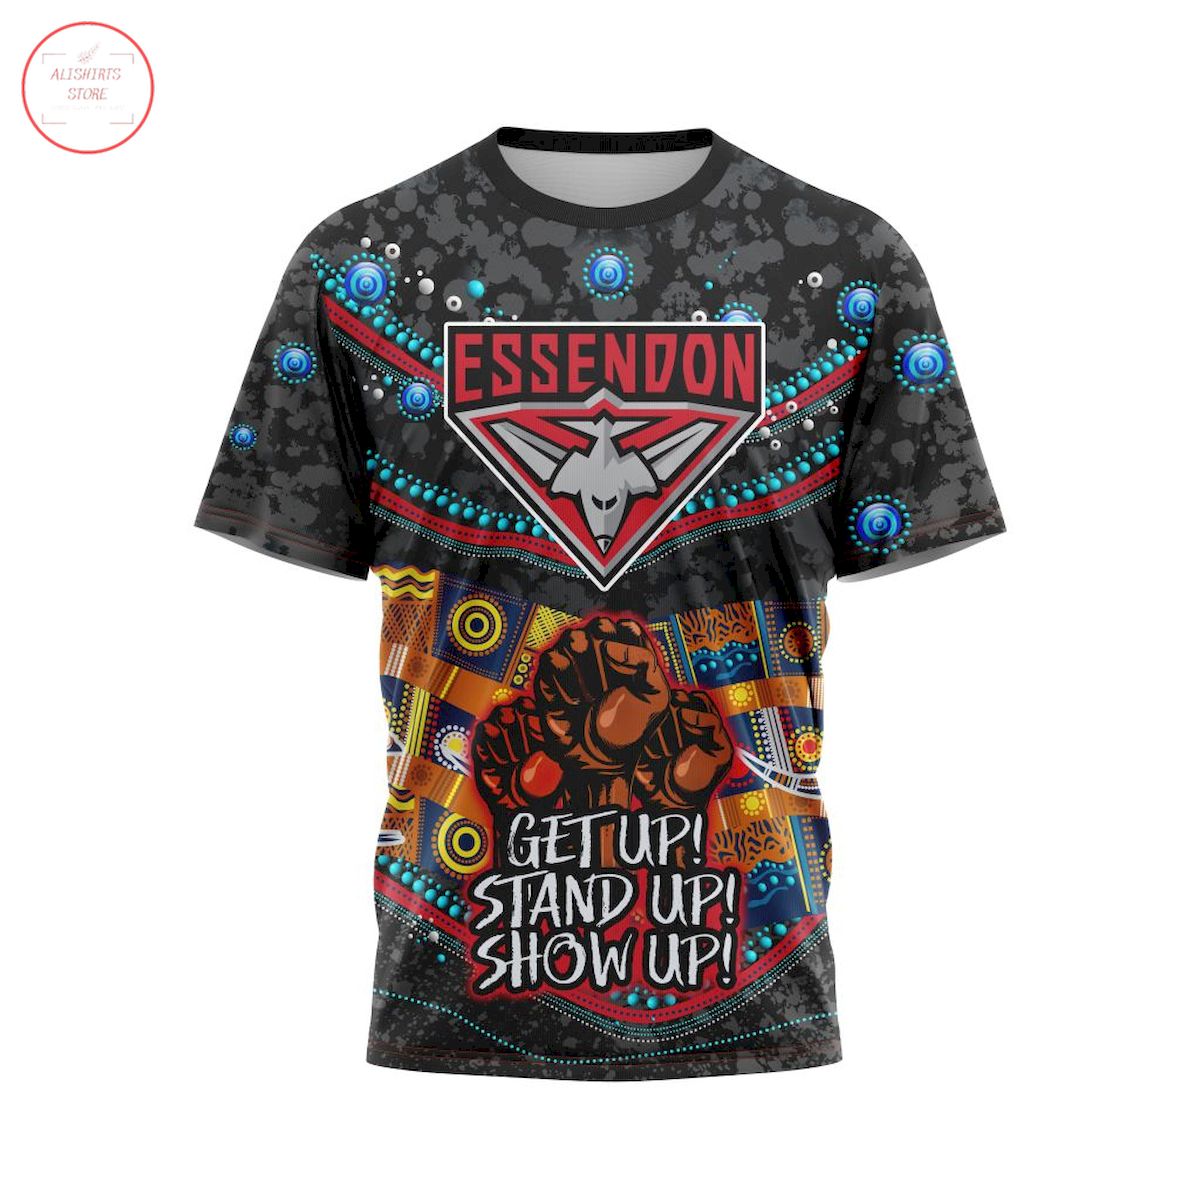 AFL Essendon Football Club Customized All Over Printed Shirts